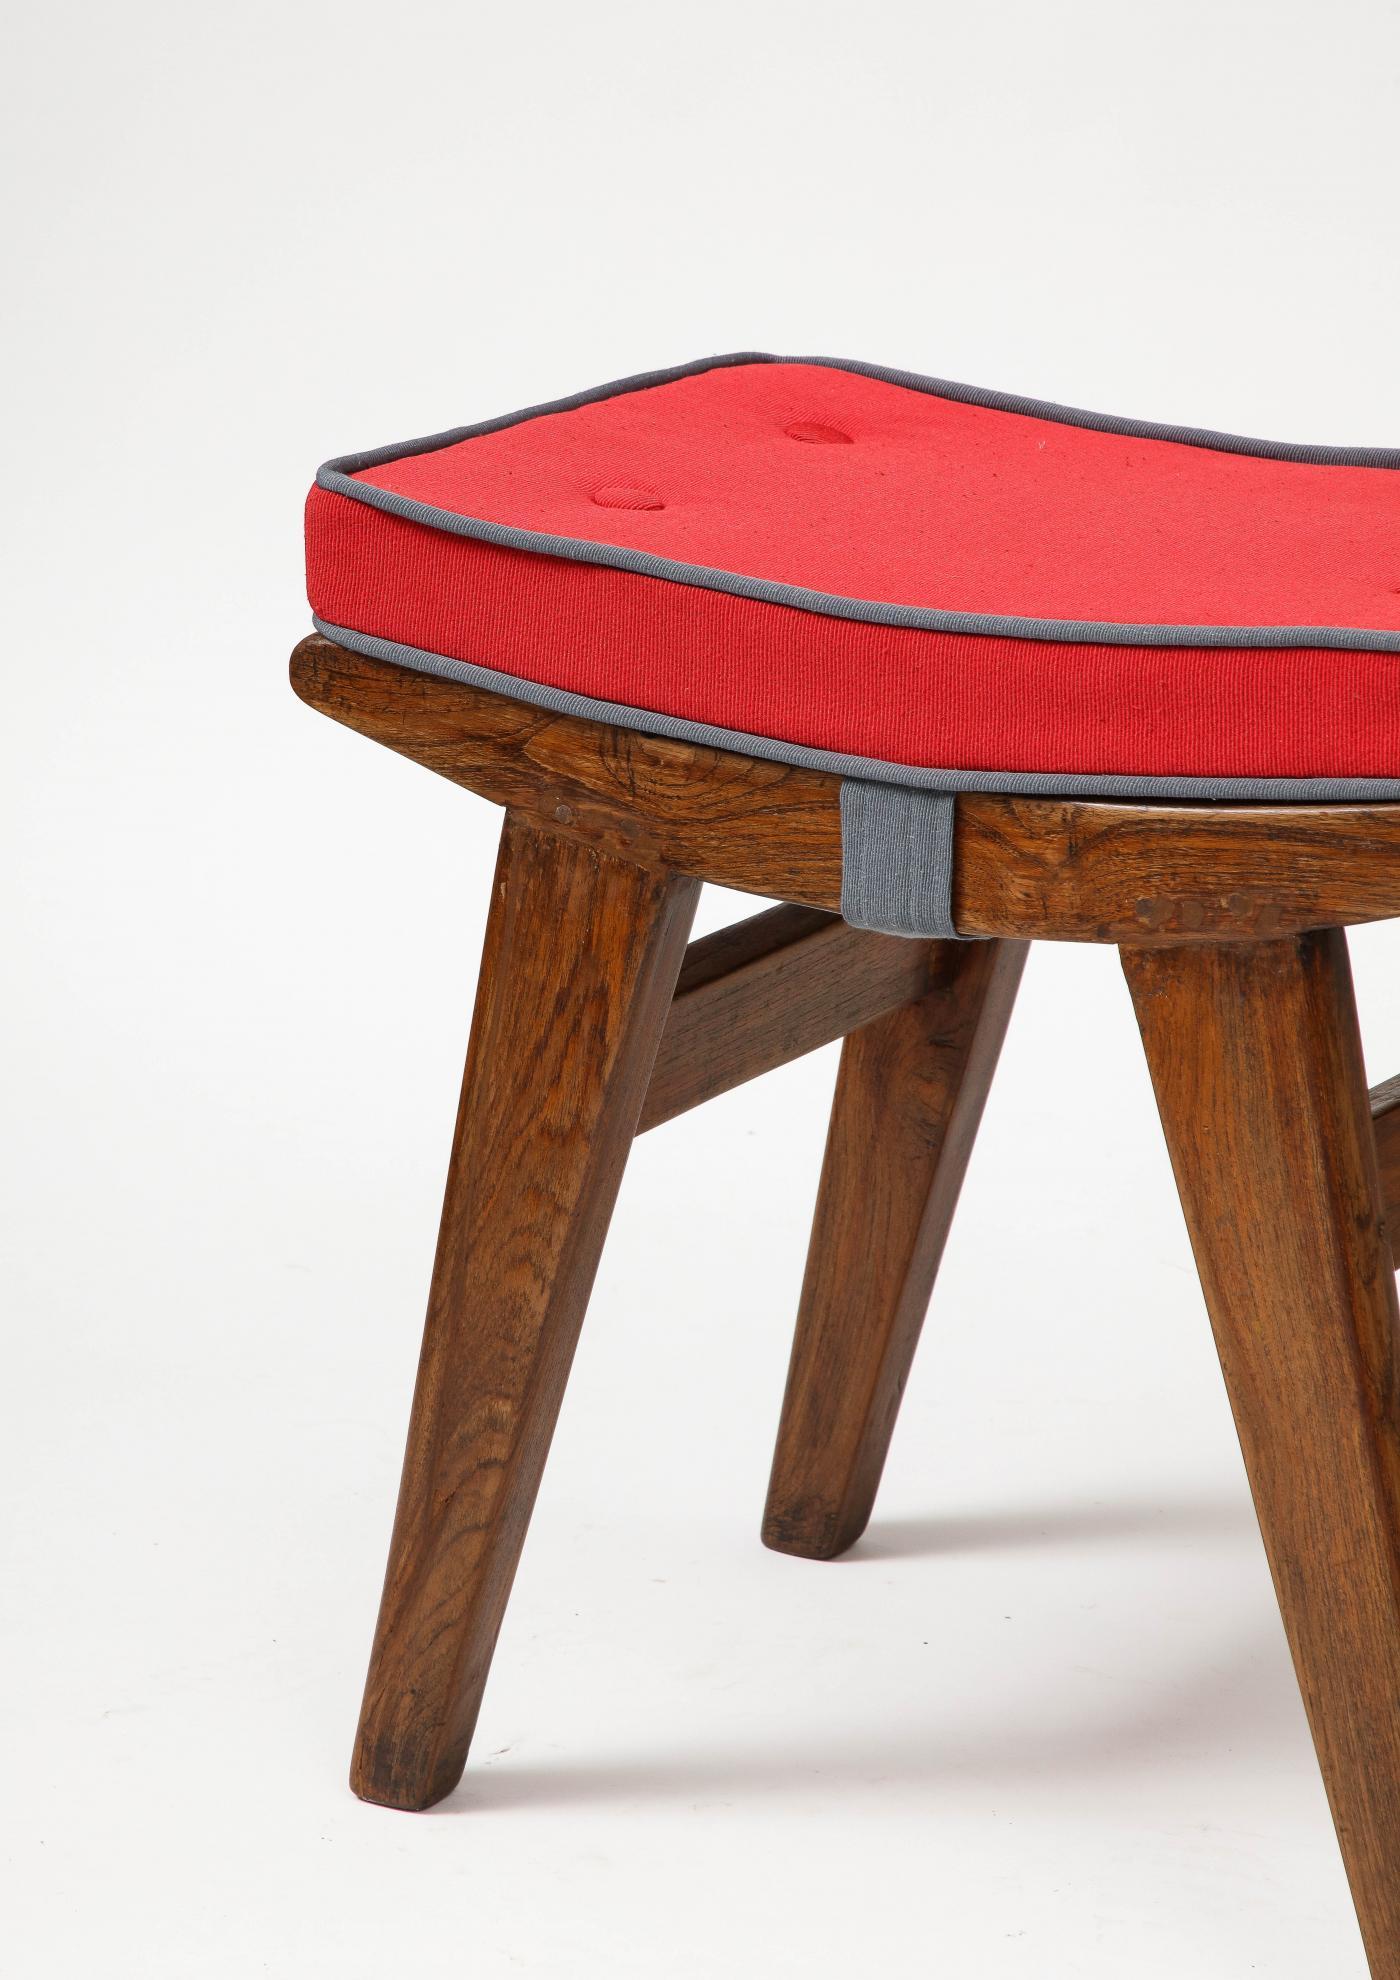 Stool in Teak, Cane and Upholstery by Pierre Jeanneret, Chandigarh, c. 1959 For Sale 6